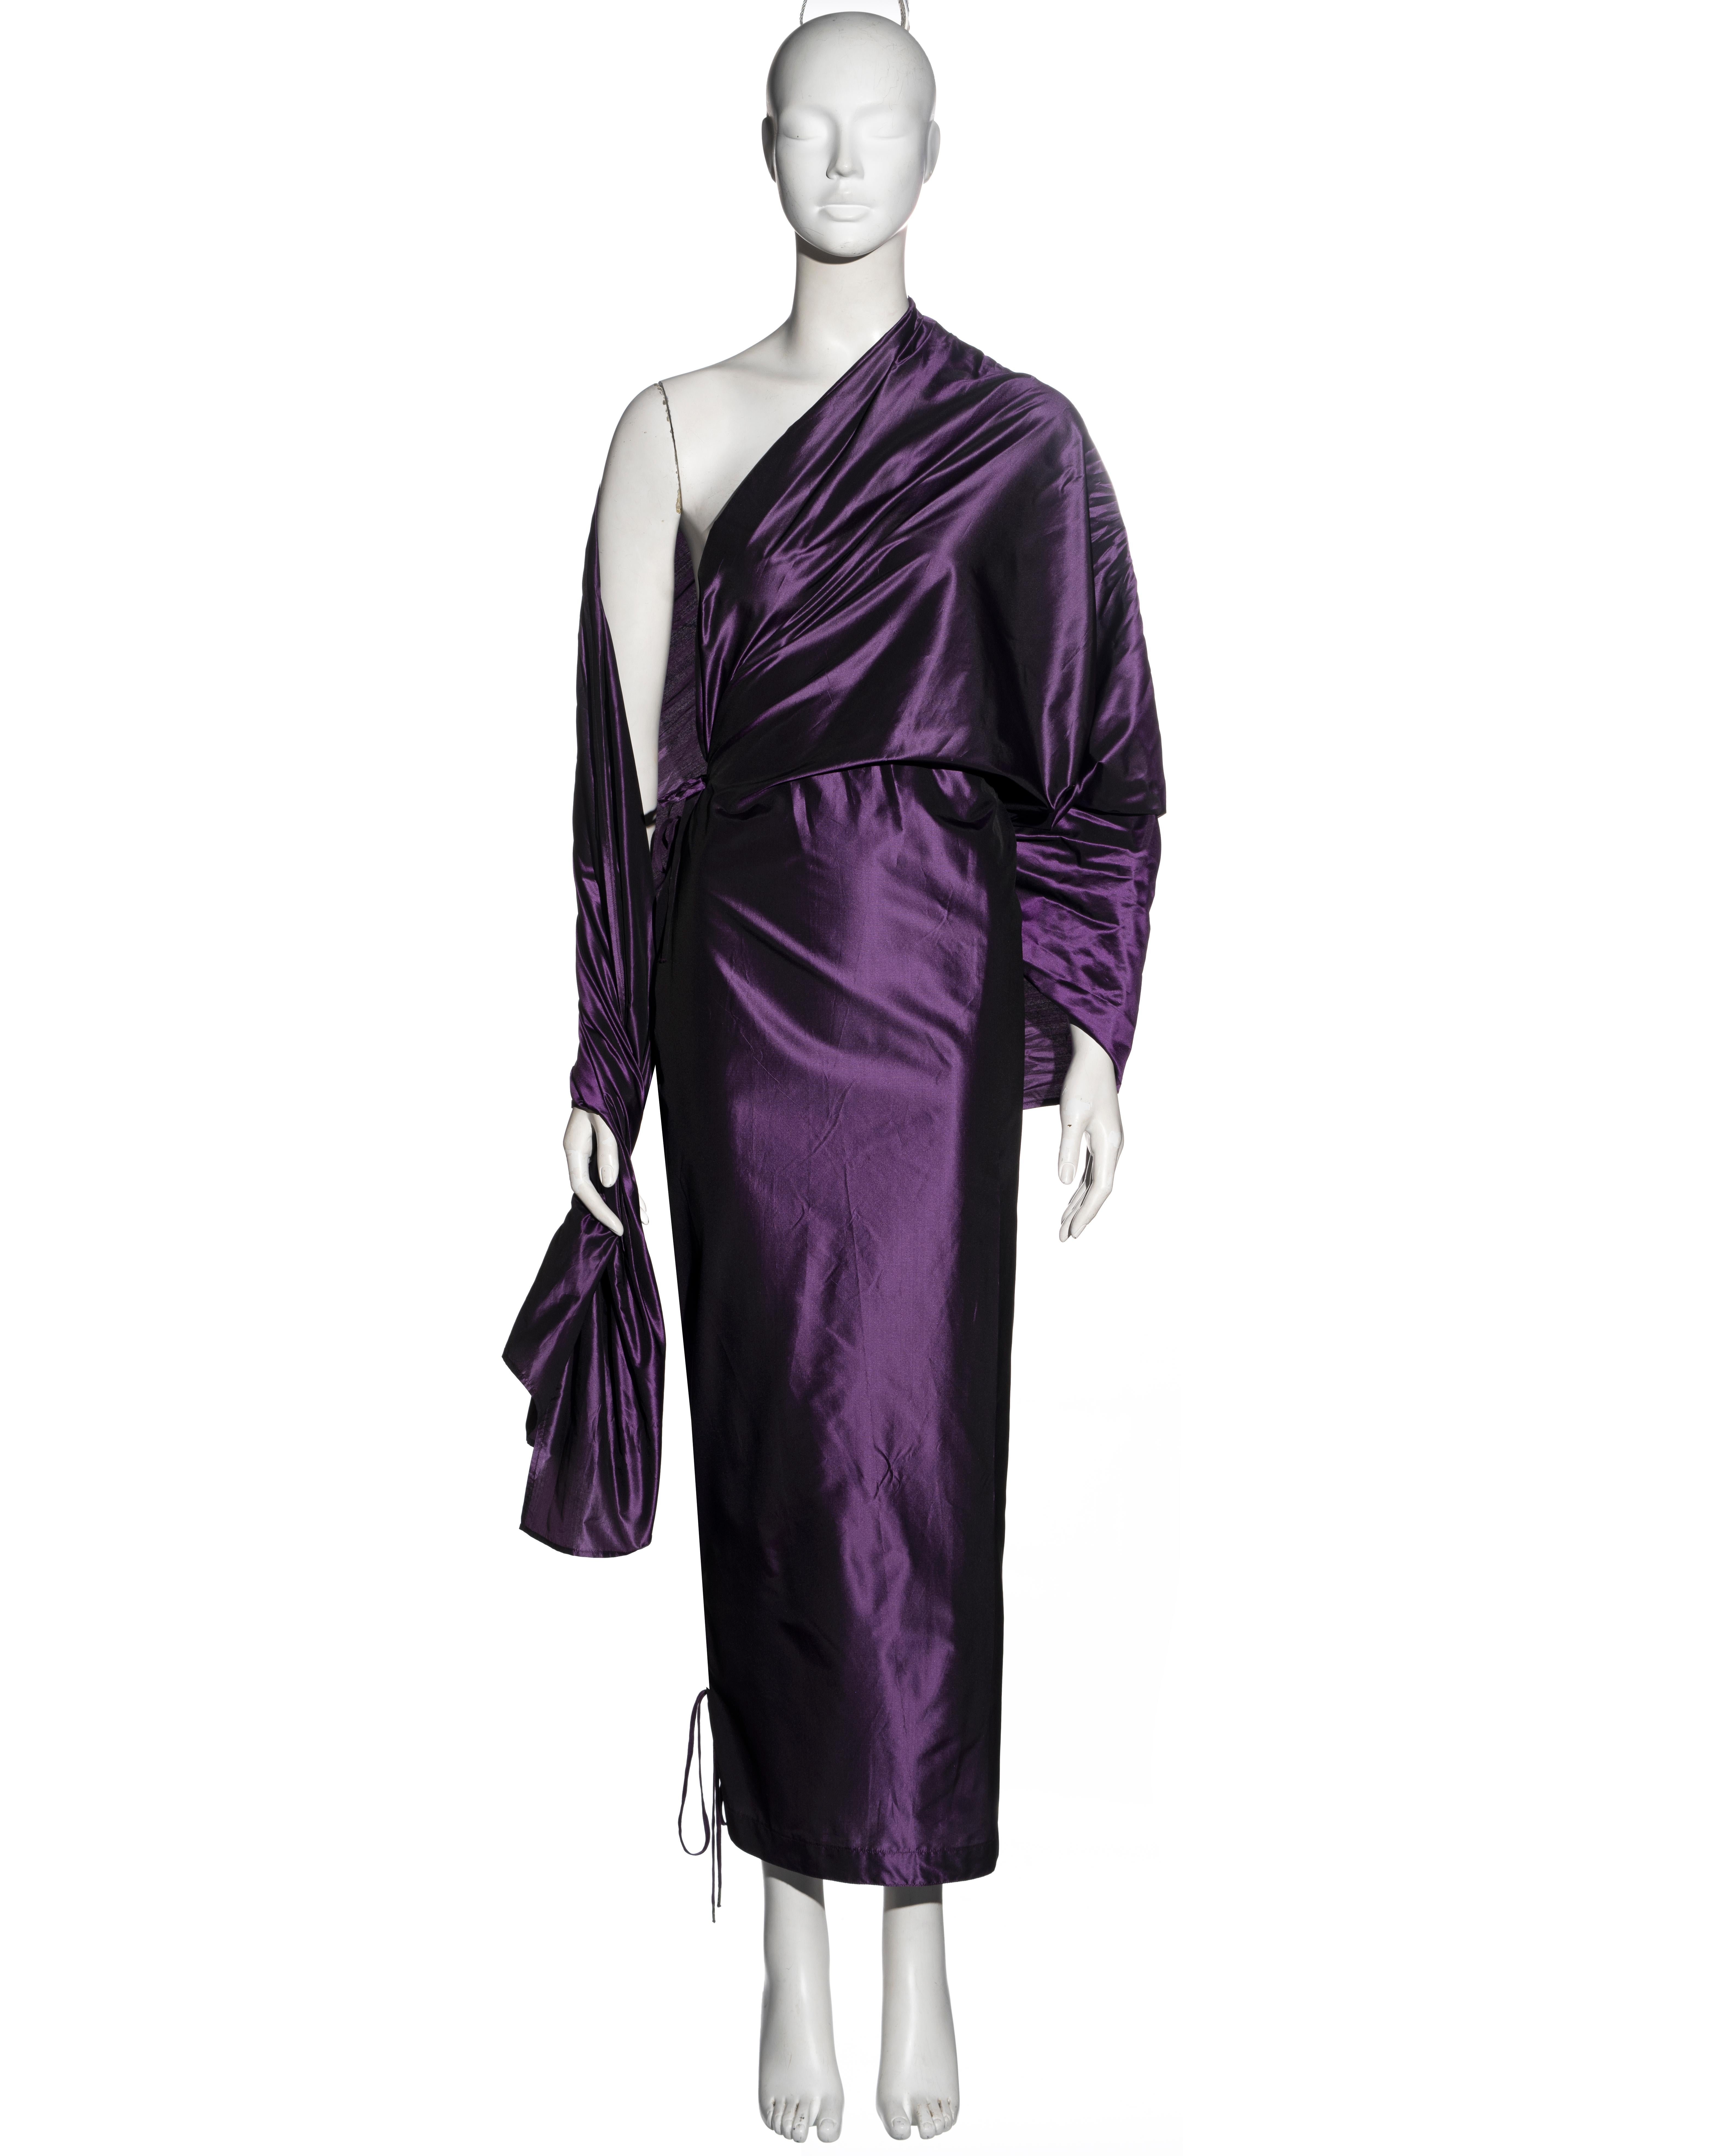 ▪ Jean Paul Gaultier evening dress
▪ Sold by One of a Kind Archive
▪ Constructed from purple taffeta 
▪ Convertible in design with many ways of styling the bodice 
▪ Signature Gaultier corset-style lacing on the skirt 
▪ IT 42 - FR 38 - UK 10 - US